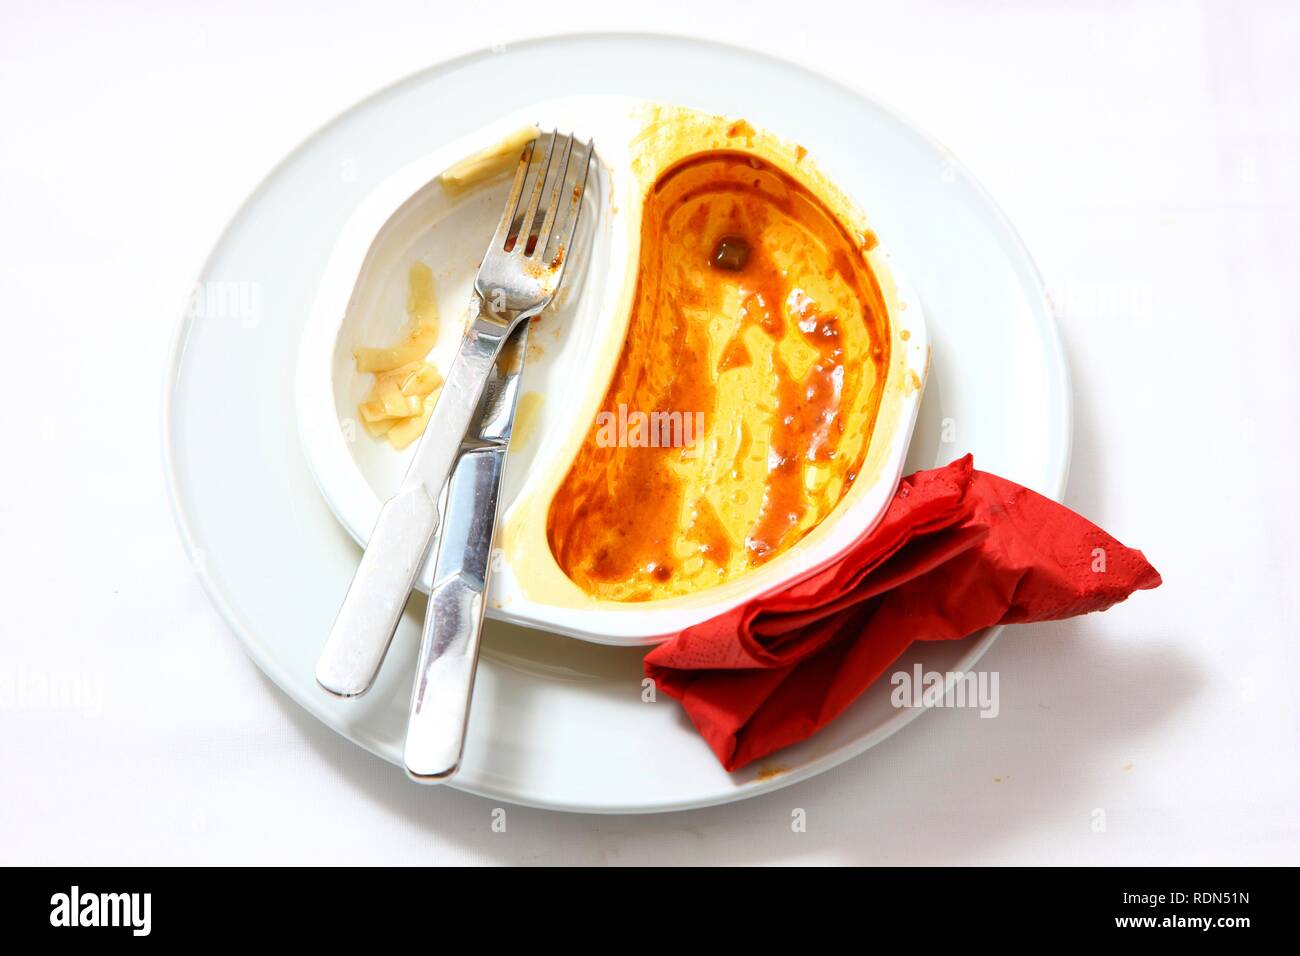 Remains of a pre-prepared meal after being eaten, served on a plate, in the original packaging Stock Photo